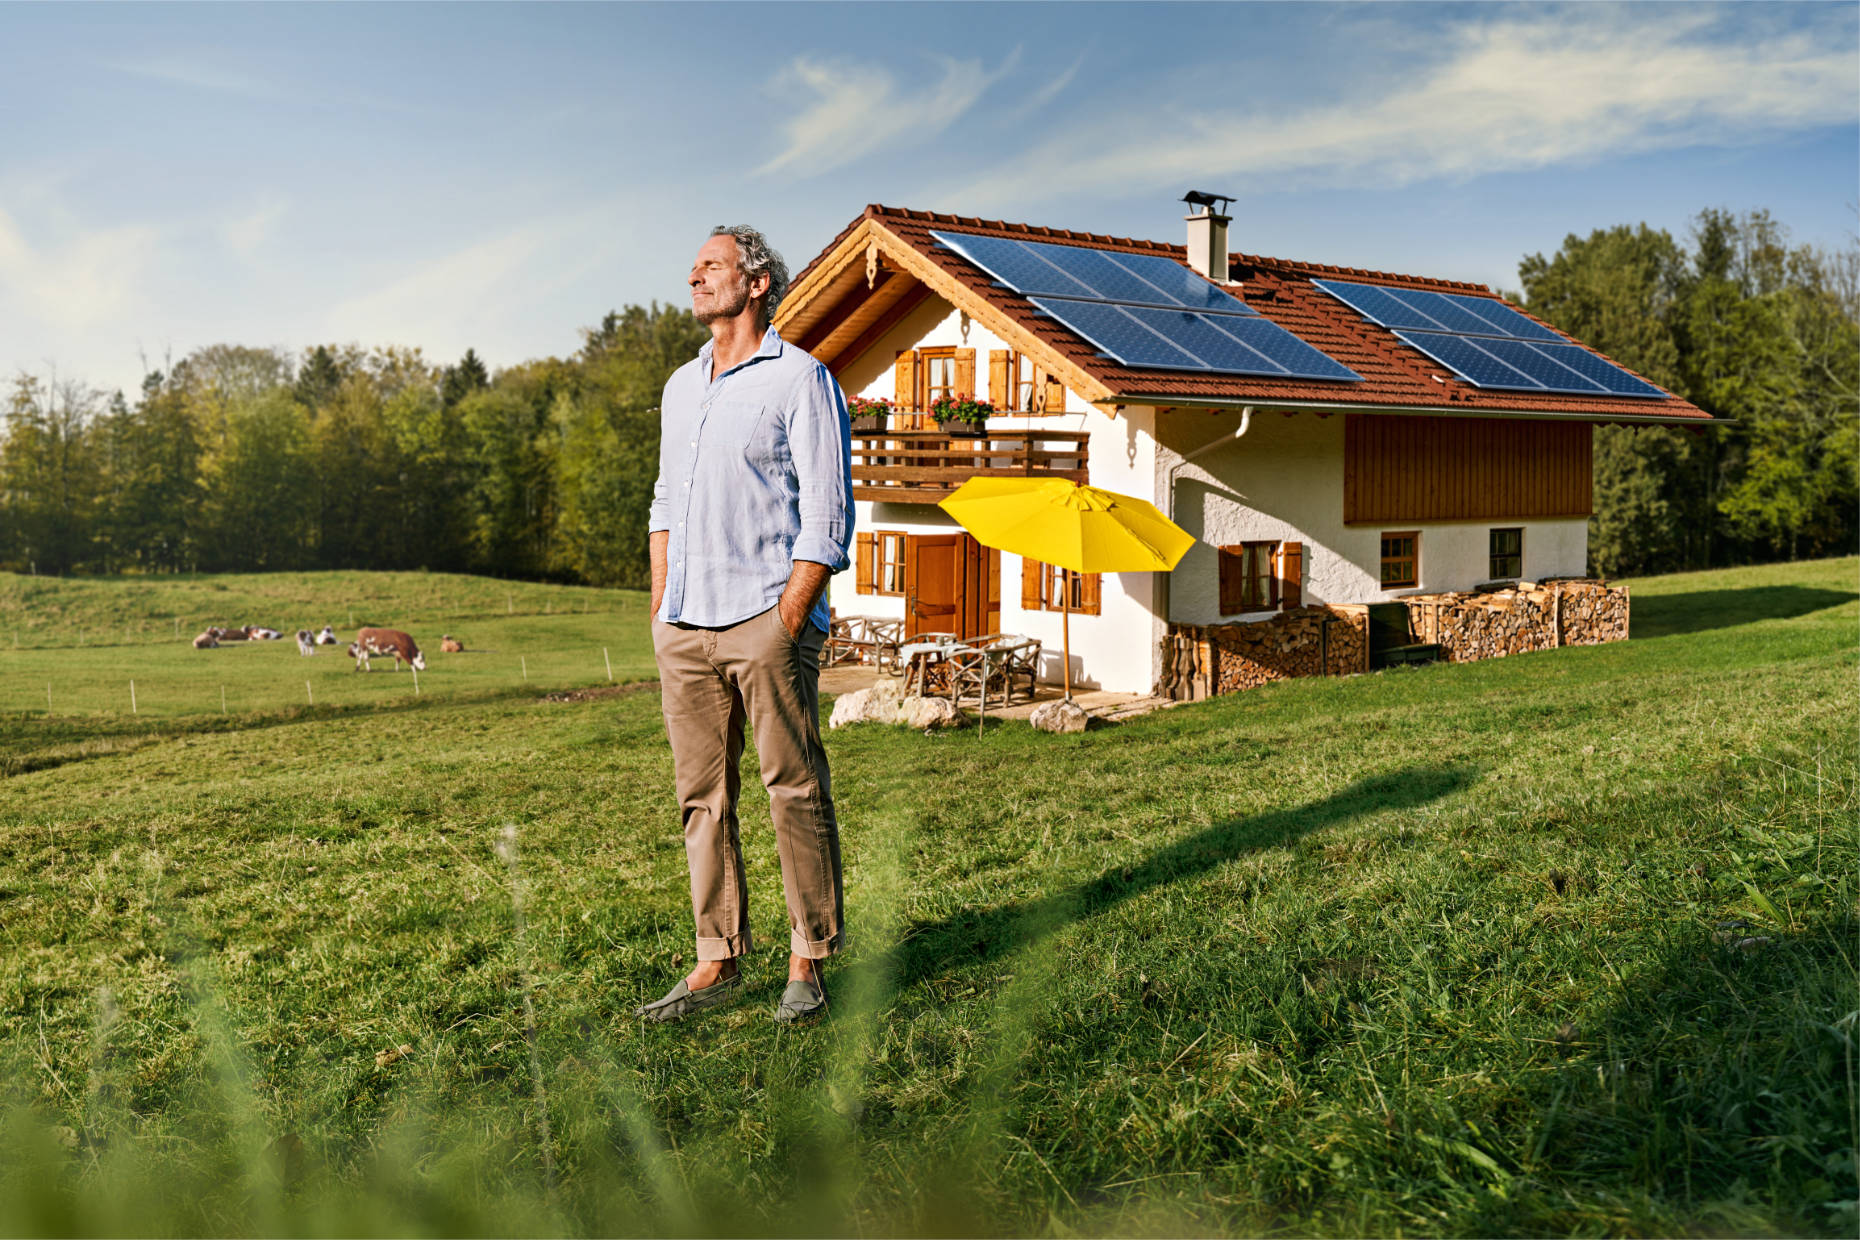 Older man standing on a field in front of his cabin with solar panels on the roof eyes closed and enjoying the sunshine